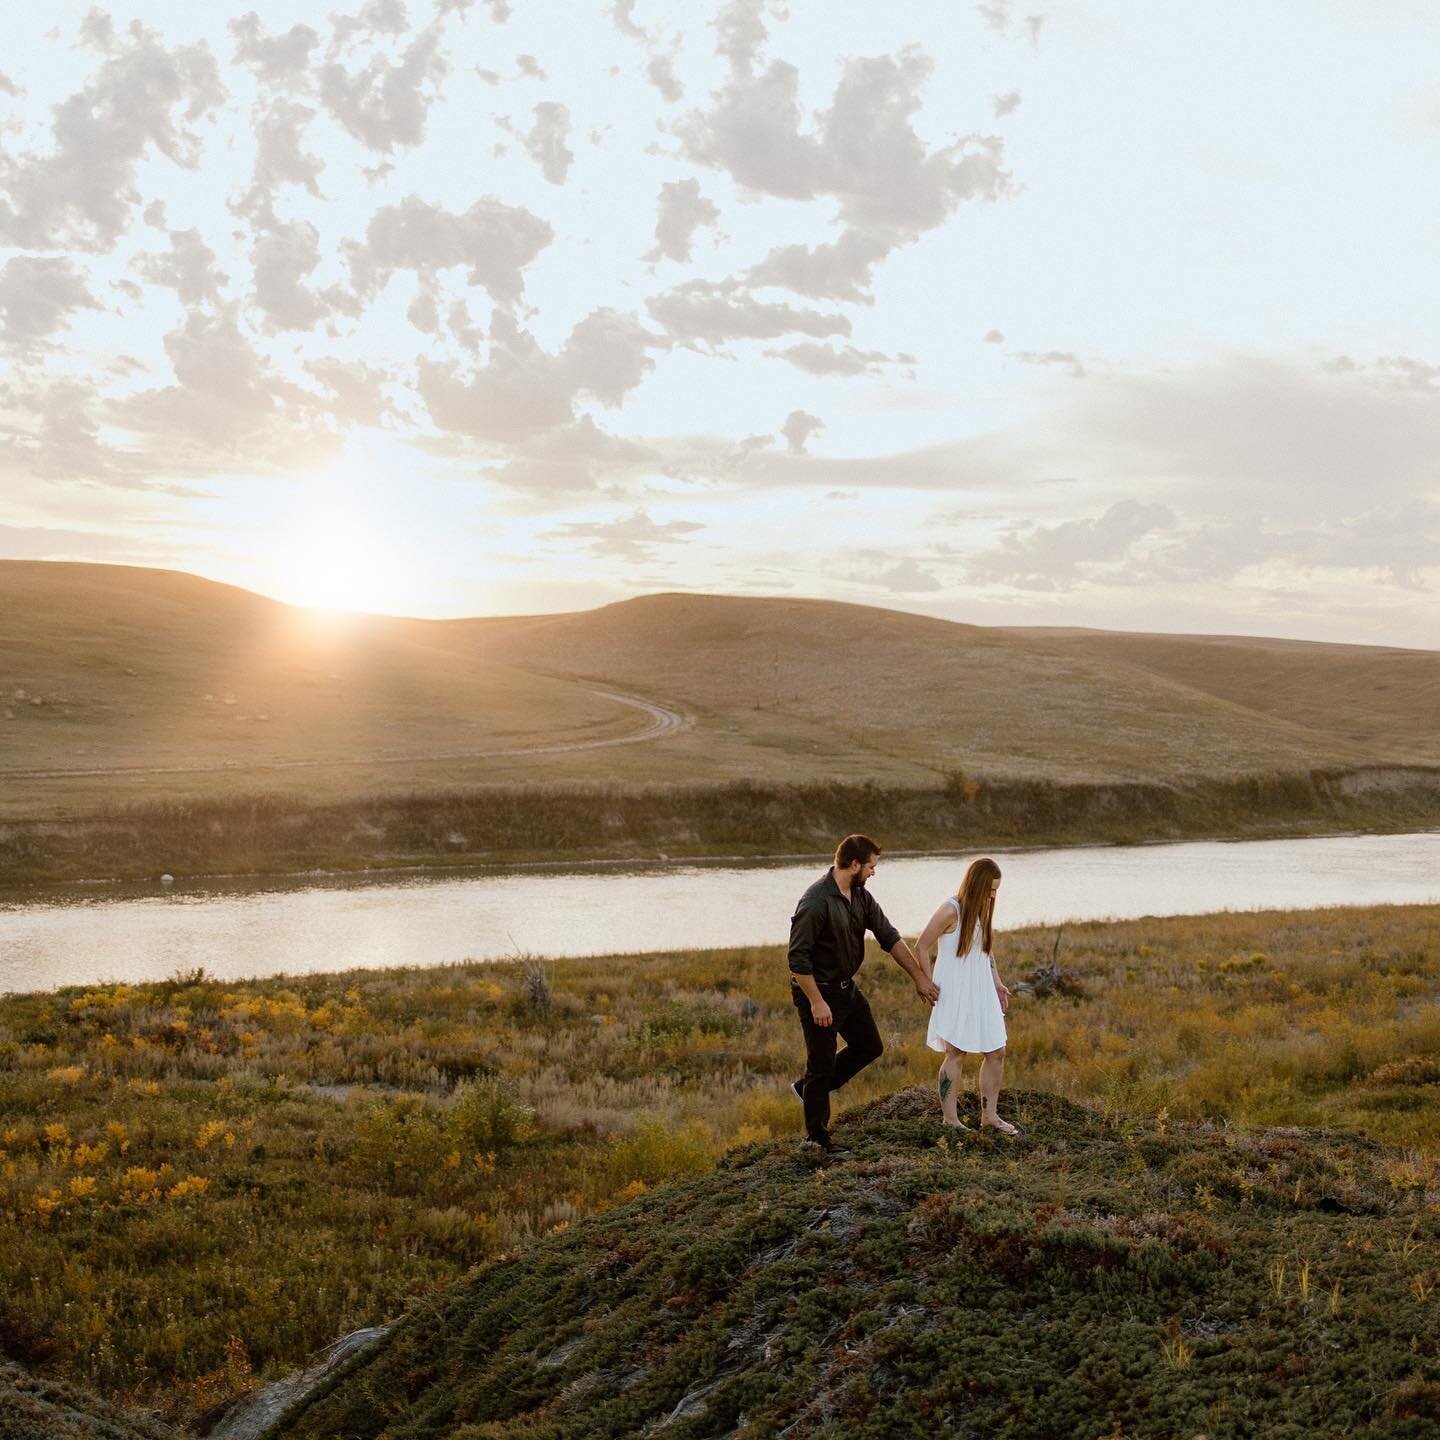 Happy Saturday ya&rsquo;ll, and happy wedding day to Cody + Ashley!!! 

Finally sharing some images from their engagement session last Fall. It was a perfectly serene evening in the hills of Southern Alberta. 🤍

#engagementphotos #yqlengagementphoto